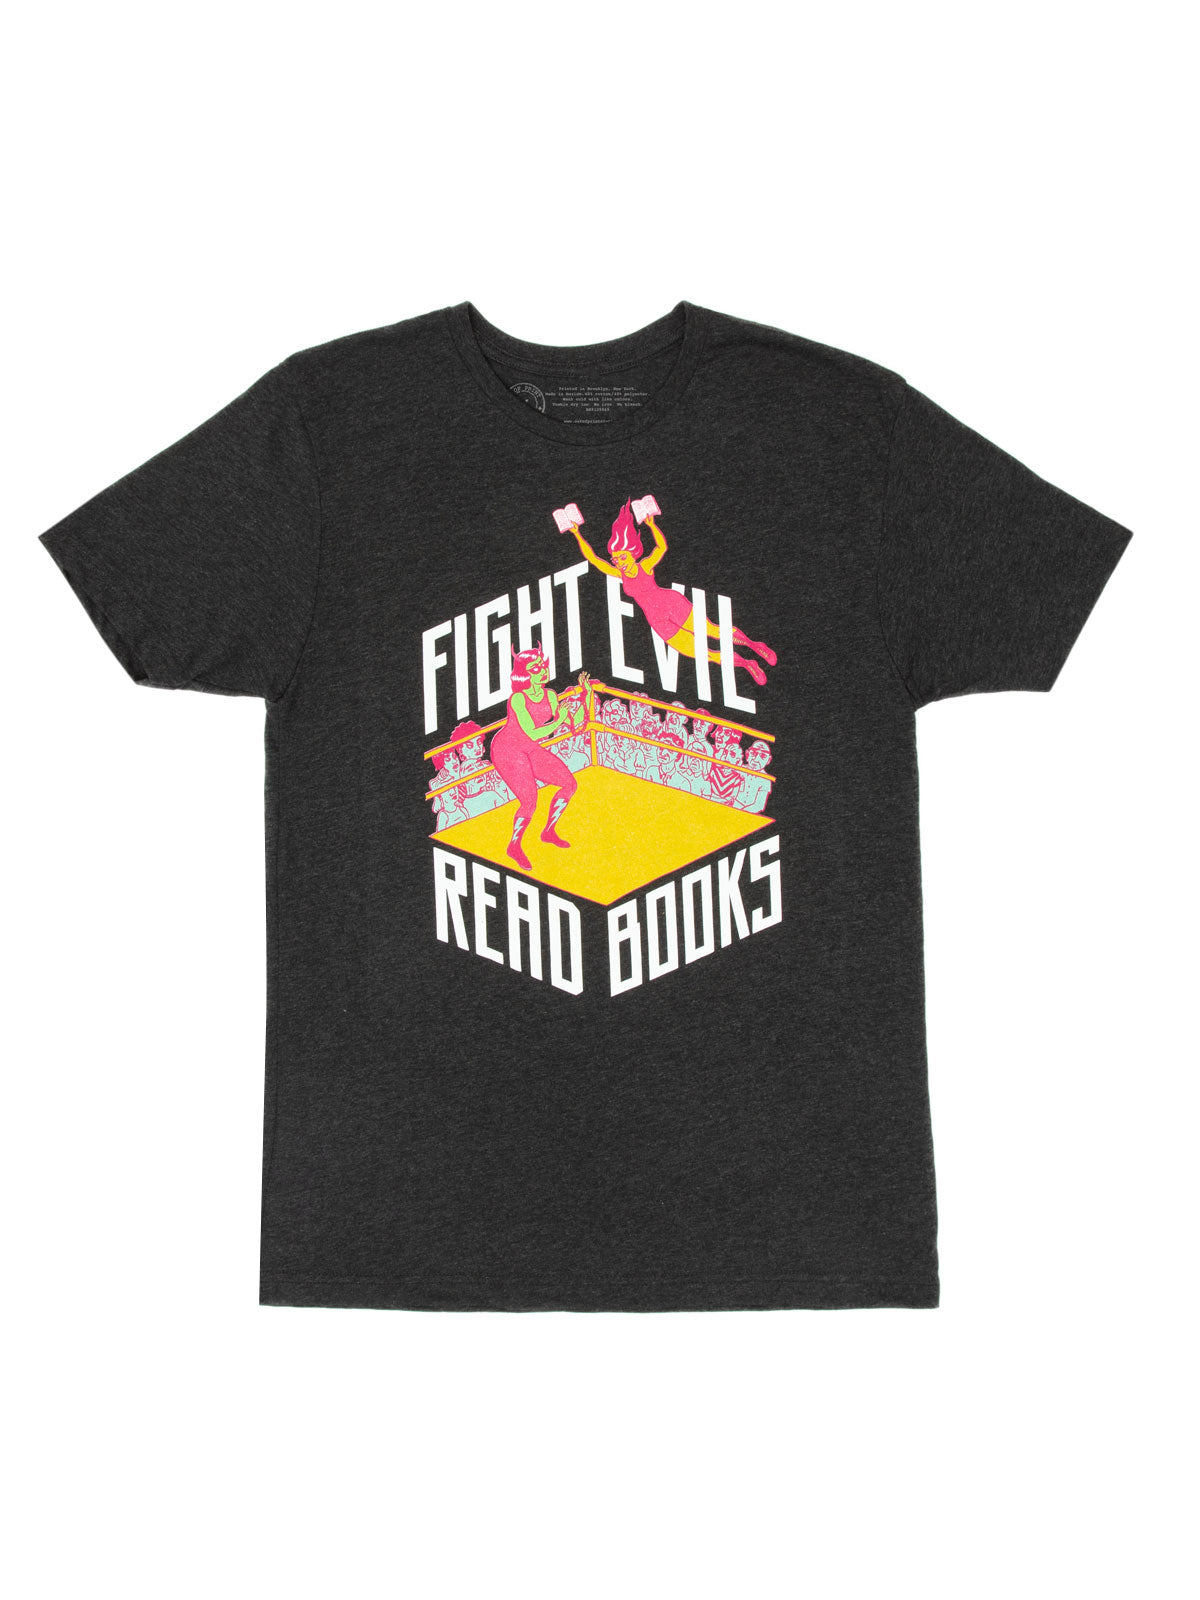 Fight Evil Read Print t-shirt 2019 of — Out Books unisex